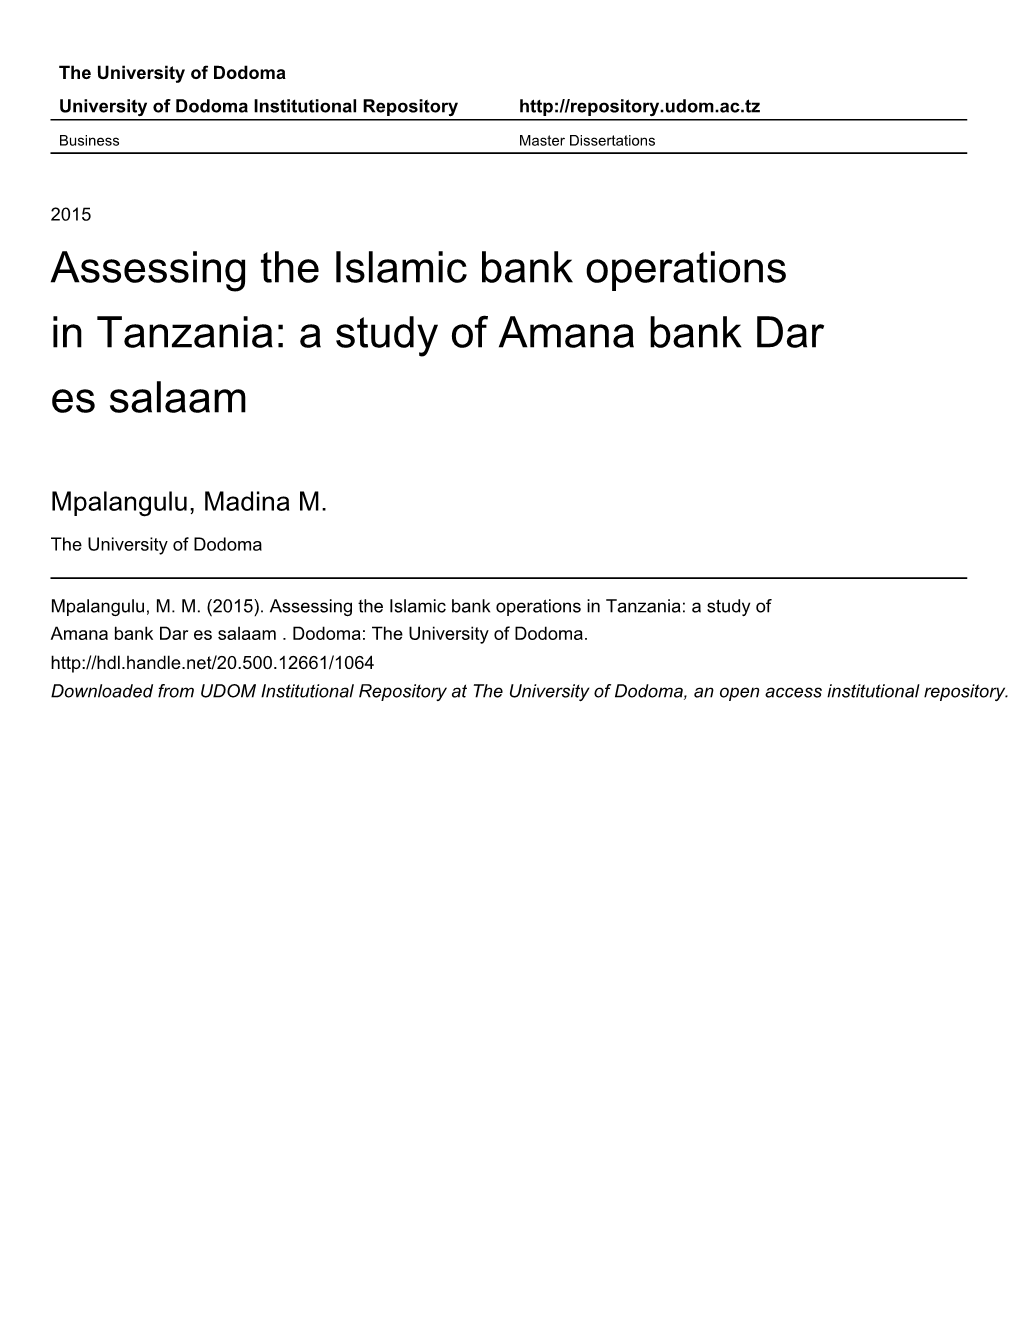 Assessing the Islamic Bank Operations in Tanzania: a Study of Amana Bank Dar Es Salaam